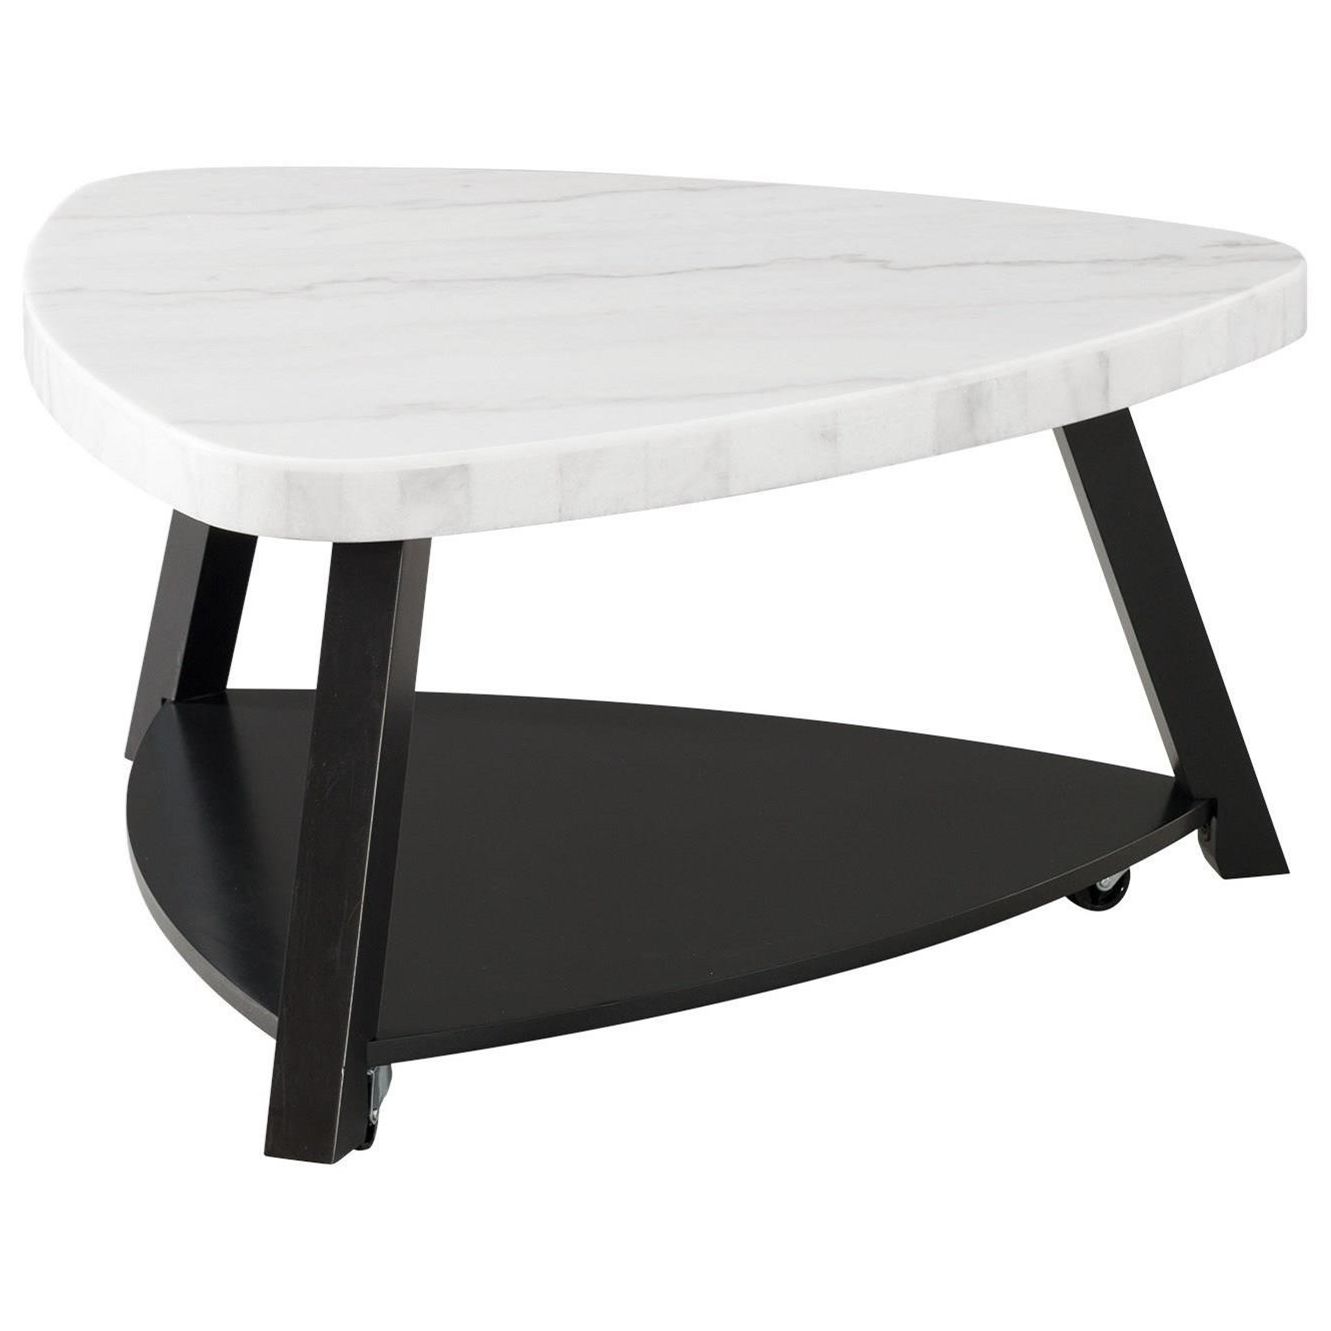 Popular Elements International Trinity Contemporary White Marble Top Coffee Intended For White Marble Coffee Tables (View 4 of 10)